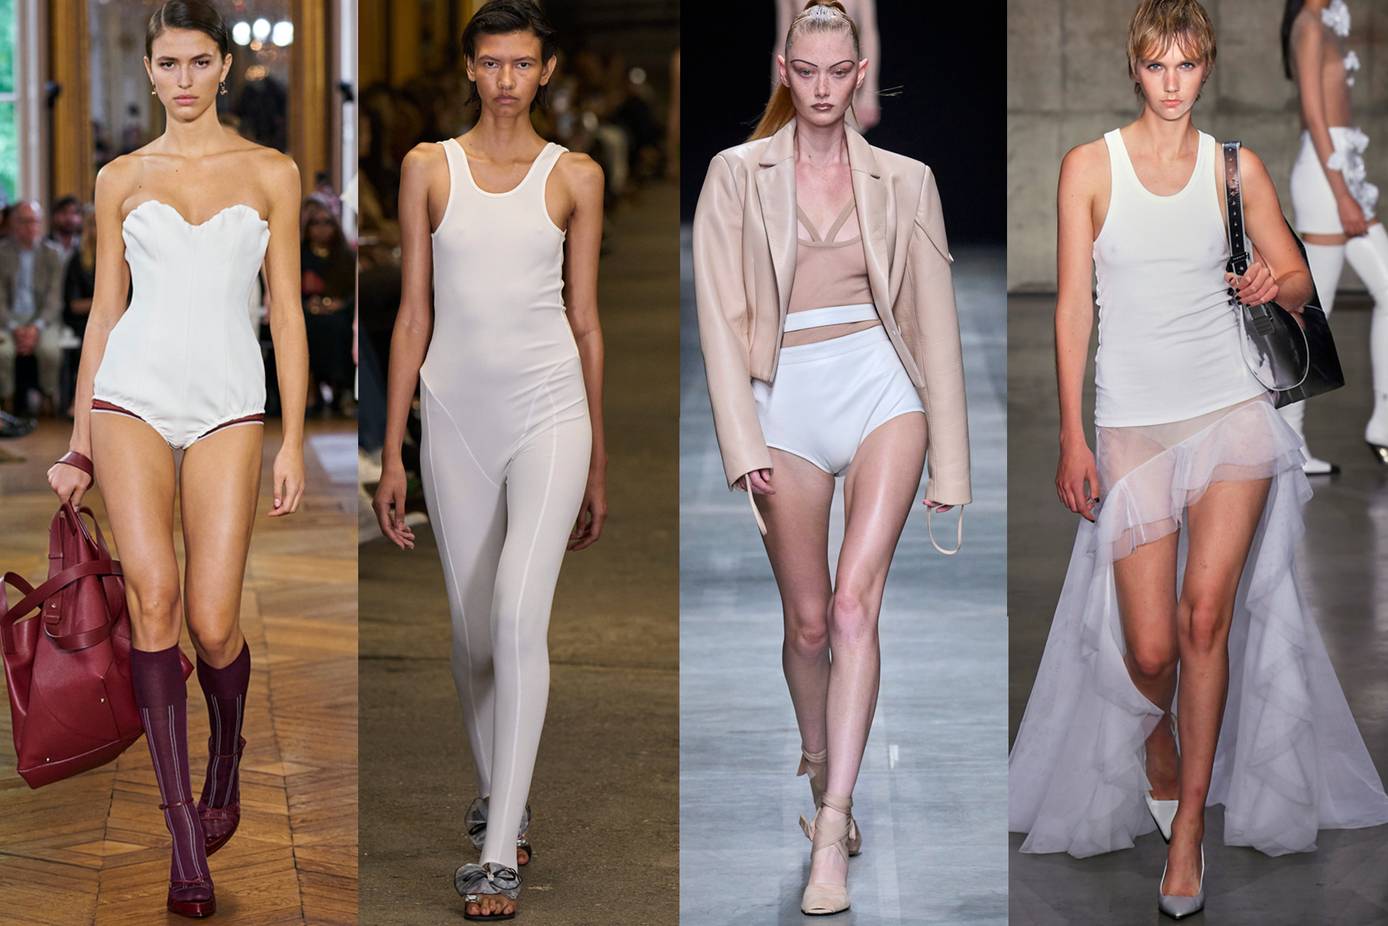 The minimal white lingerie trend is both androgynous and trans-seasonal